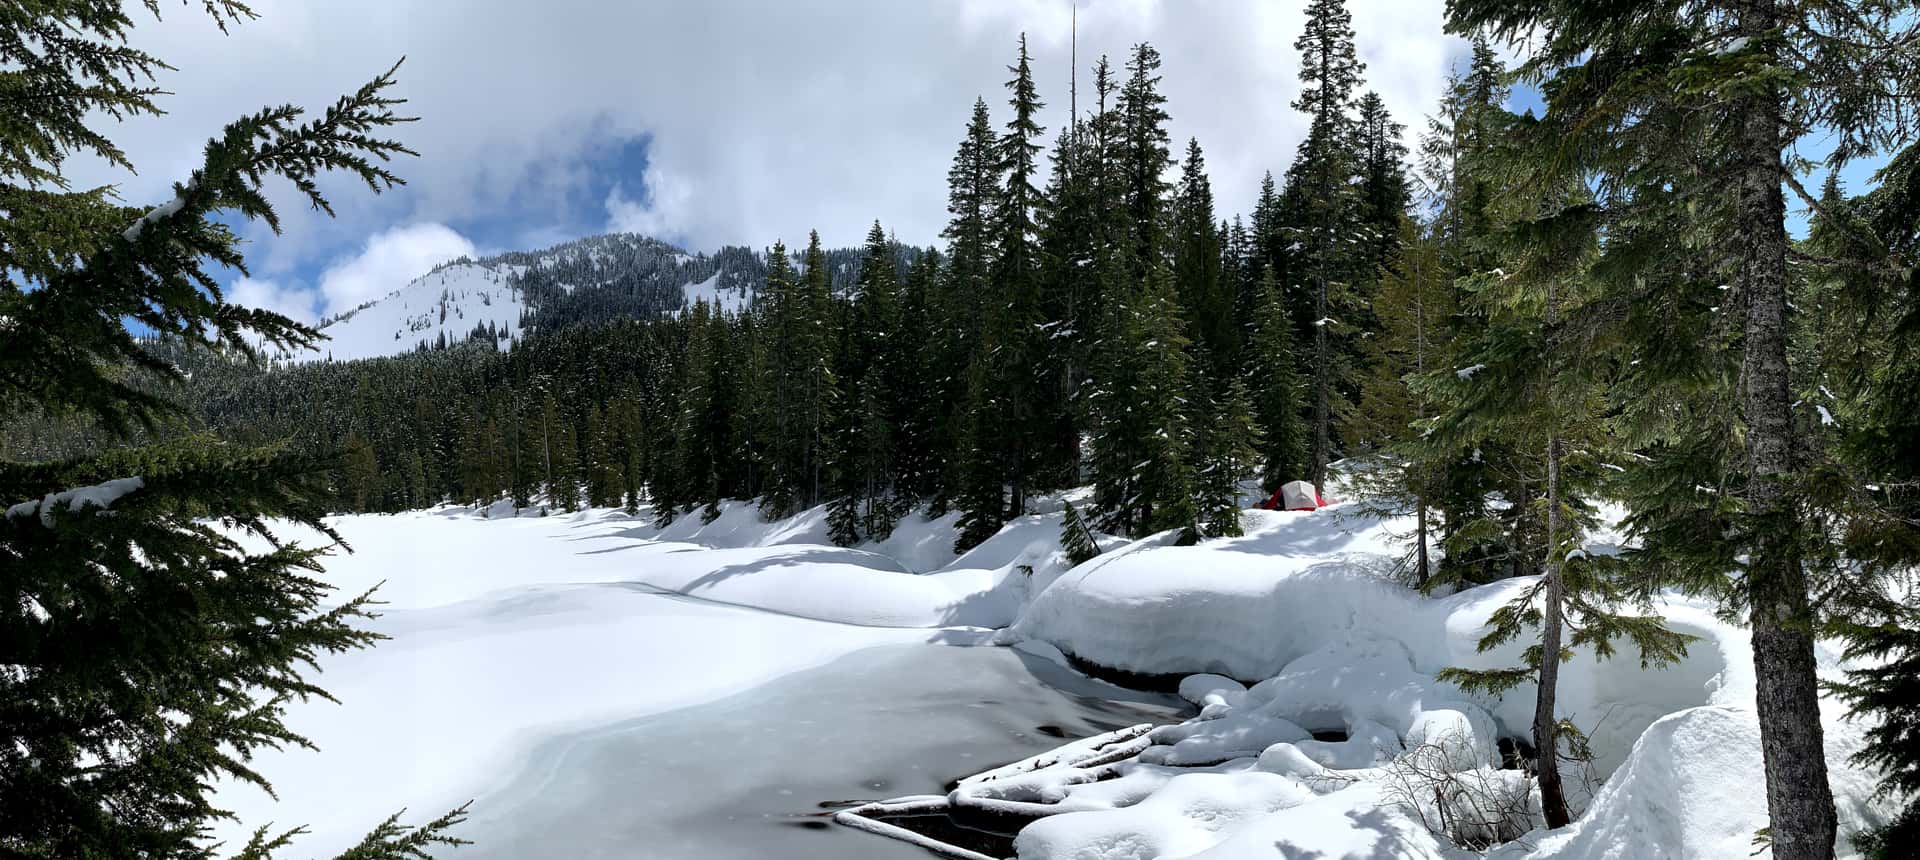 campsite in the snow at Olallie Lake